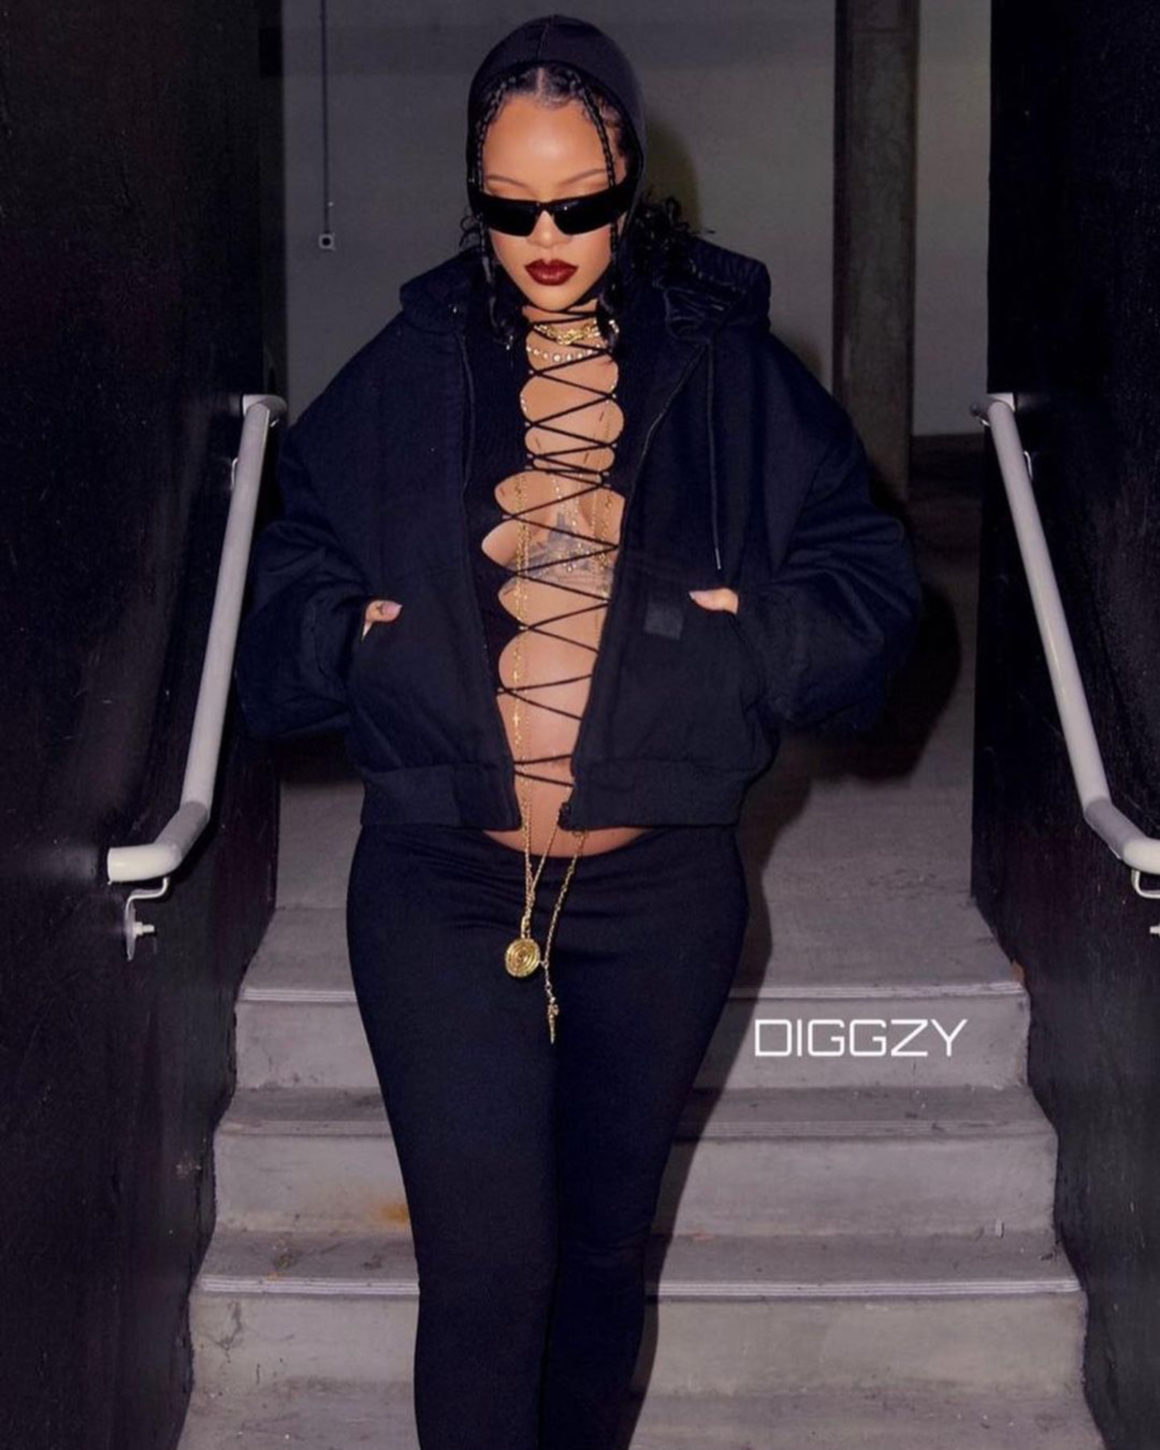 https://fashionbombdaily.com/wp-content/uploads/2022/02/5-Rihanna-Shows-Off-Her-Baby-Bump-in-Black-Lace-up-Jean-Paul-Gaultier-Top-Carhartt-Jacket-and-The-Attico-Leggings-1160x1450.jpg